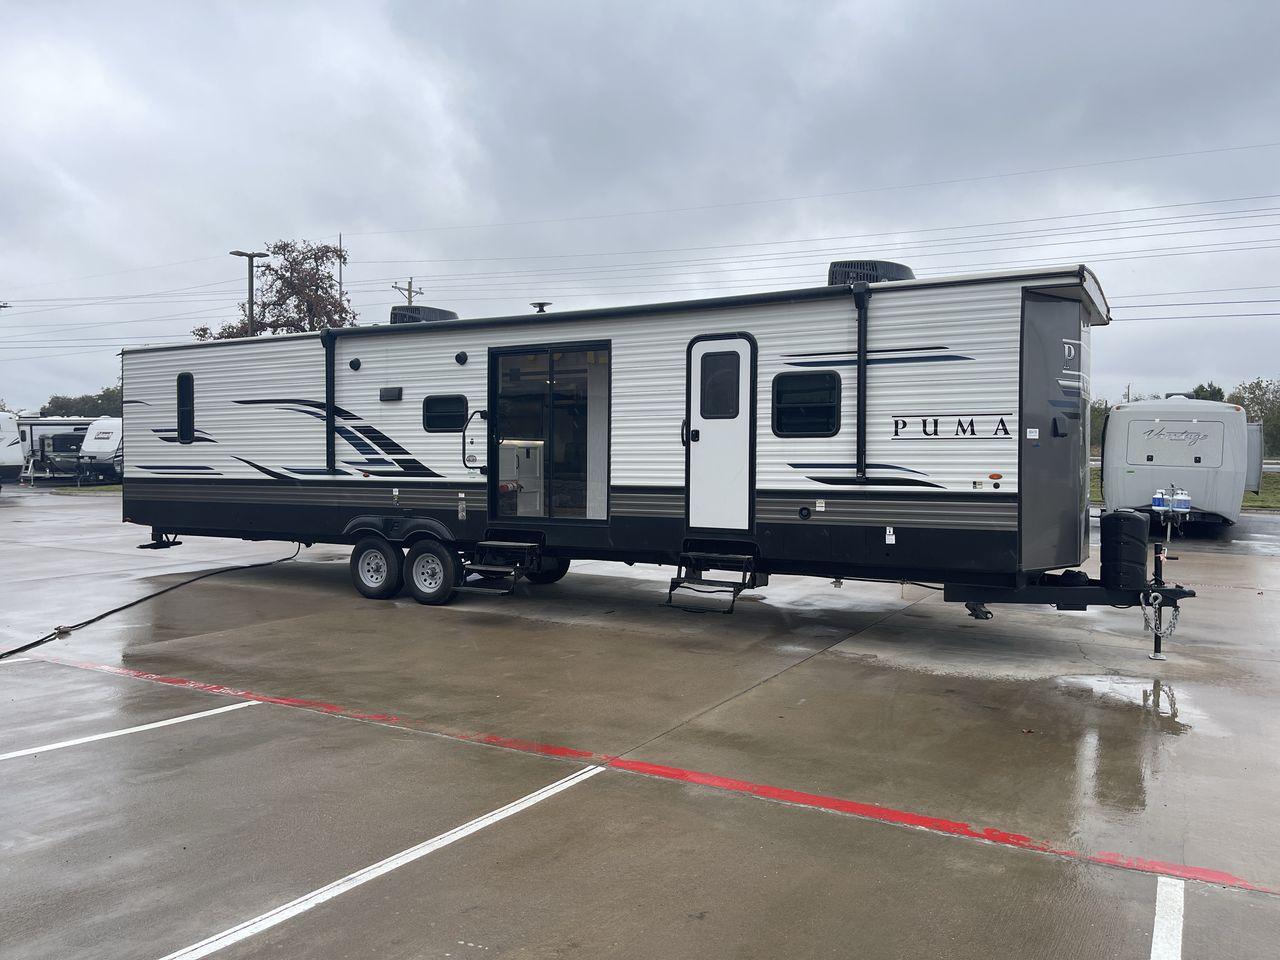 2022 FOREST RIVER PUMA TOWABLES (4X4TPUR22PP) , Length: 42.33 ft. | Dry Weight: 10,162 lbs. | Gross Weight: 12,000 lbs.| Slides: 3 transmission, located at 4319 N Main St, Cleburne, TX, 76033, (817) 678-5133, 32.385960, -97.391212 - If you're in the market for a top-of-the-line travel trailer bunk house, look no further than this 2022 PUMA 39DBT available at RV Depot in Cleburne, TX. With its exceptional features and unbeatable price of $60,995, this vehicle is a steal for any outdoor enthusiast. The 2022 PUMA 39DBT is desig - Photo #29